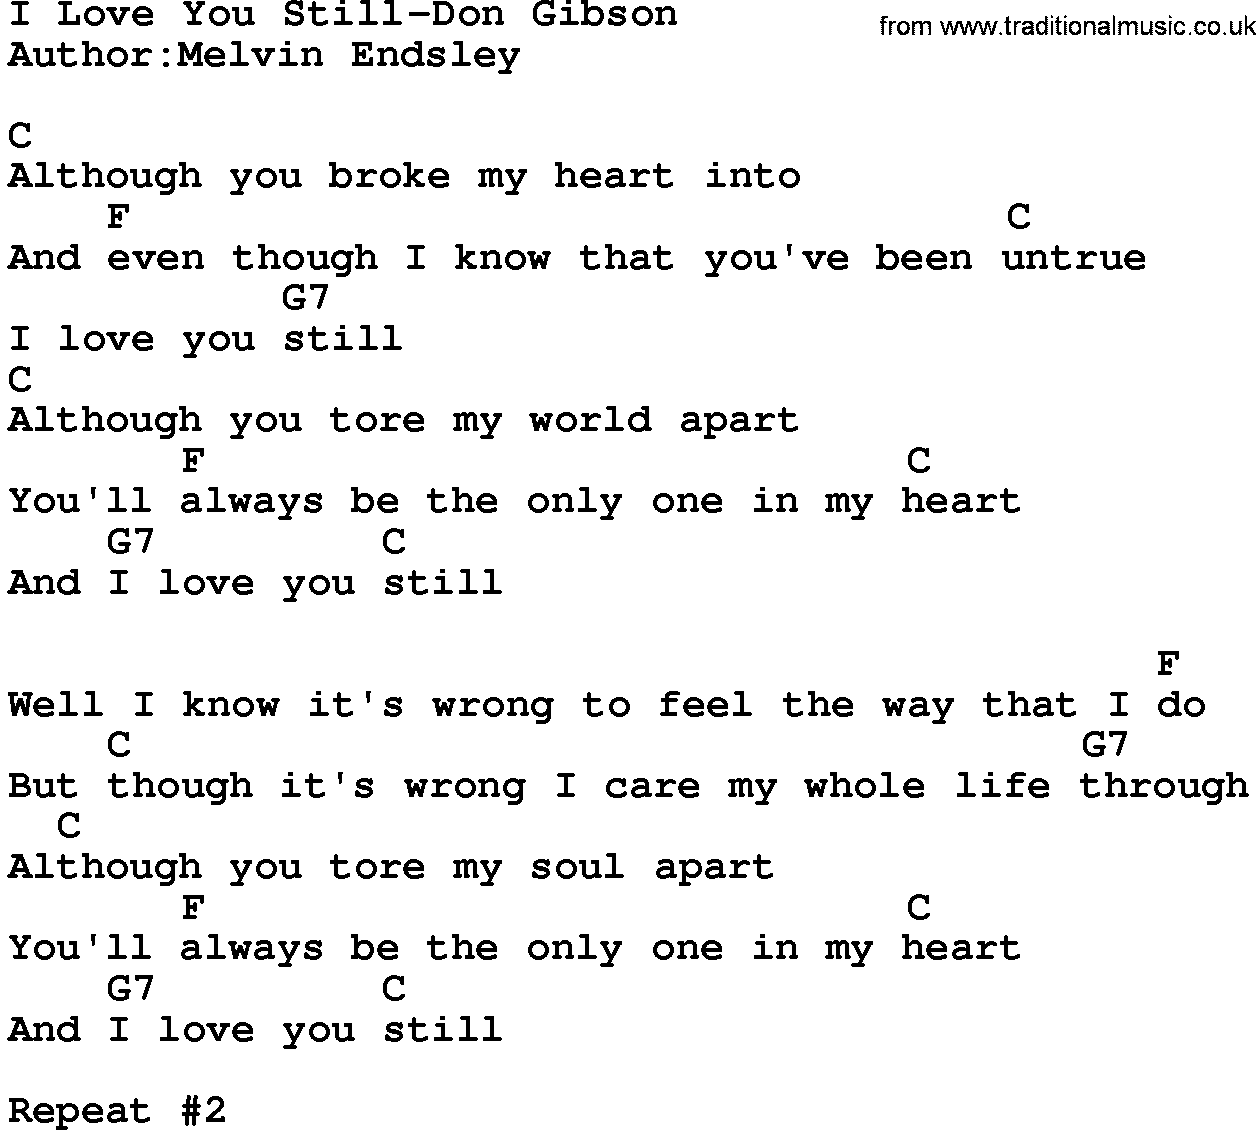 Country Music:I Love You Still-Don Gibson Lyrics and Chords